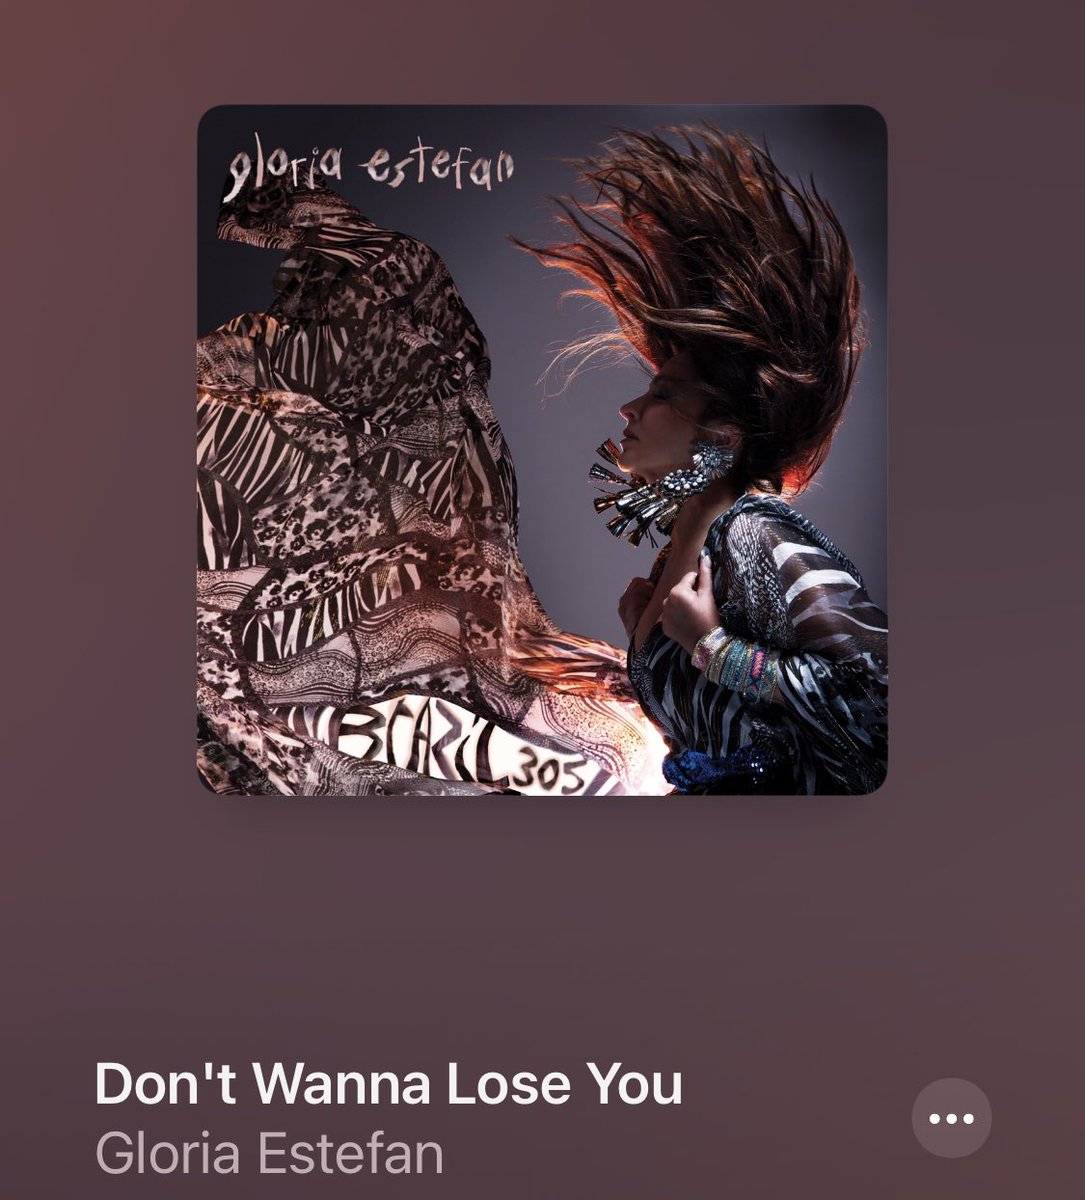 Left work in tears this afternoon and let me tell you…this song was so calming for me. The rhythms, vibe, and that cute little Cuíca are so relaxing. Thank you for this album @GloriaEstefan 🥰❤️ #Brazil305